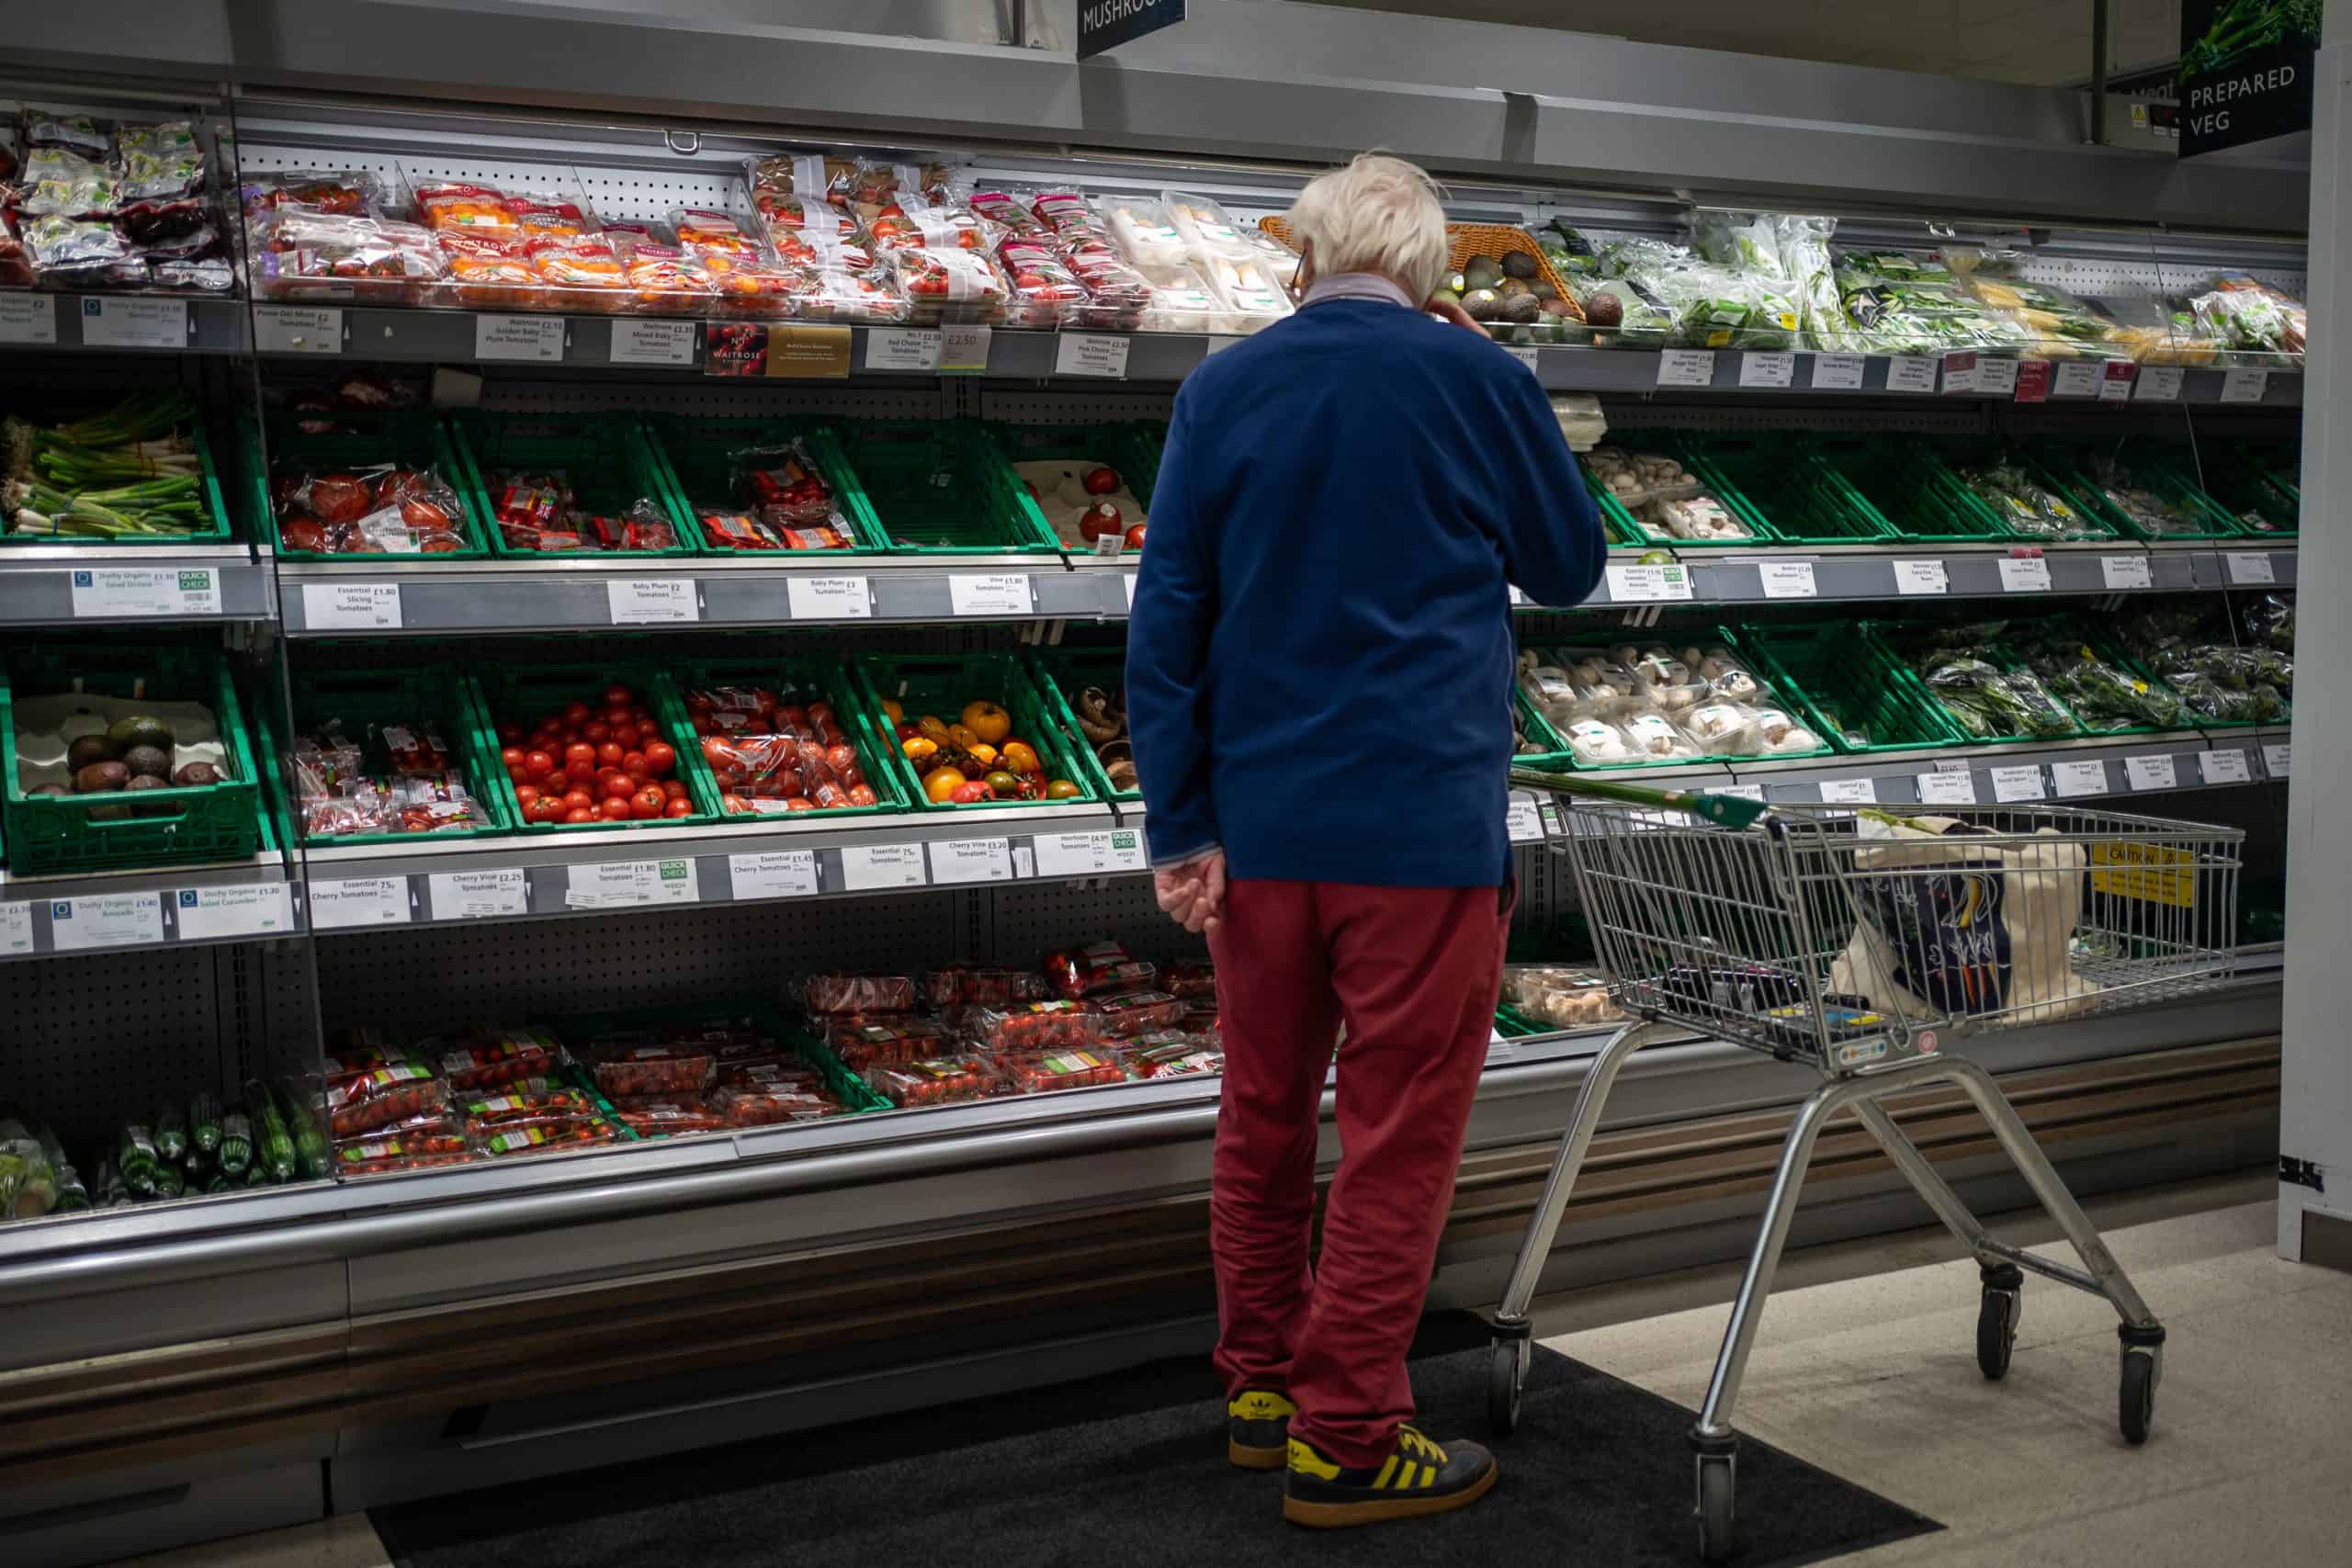 ‘It’s getting worse’: Inflation rises to eye-watering 9.4%